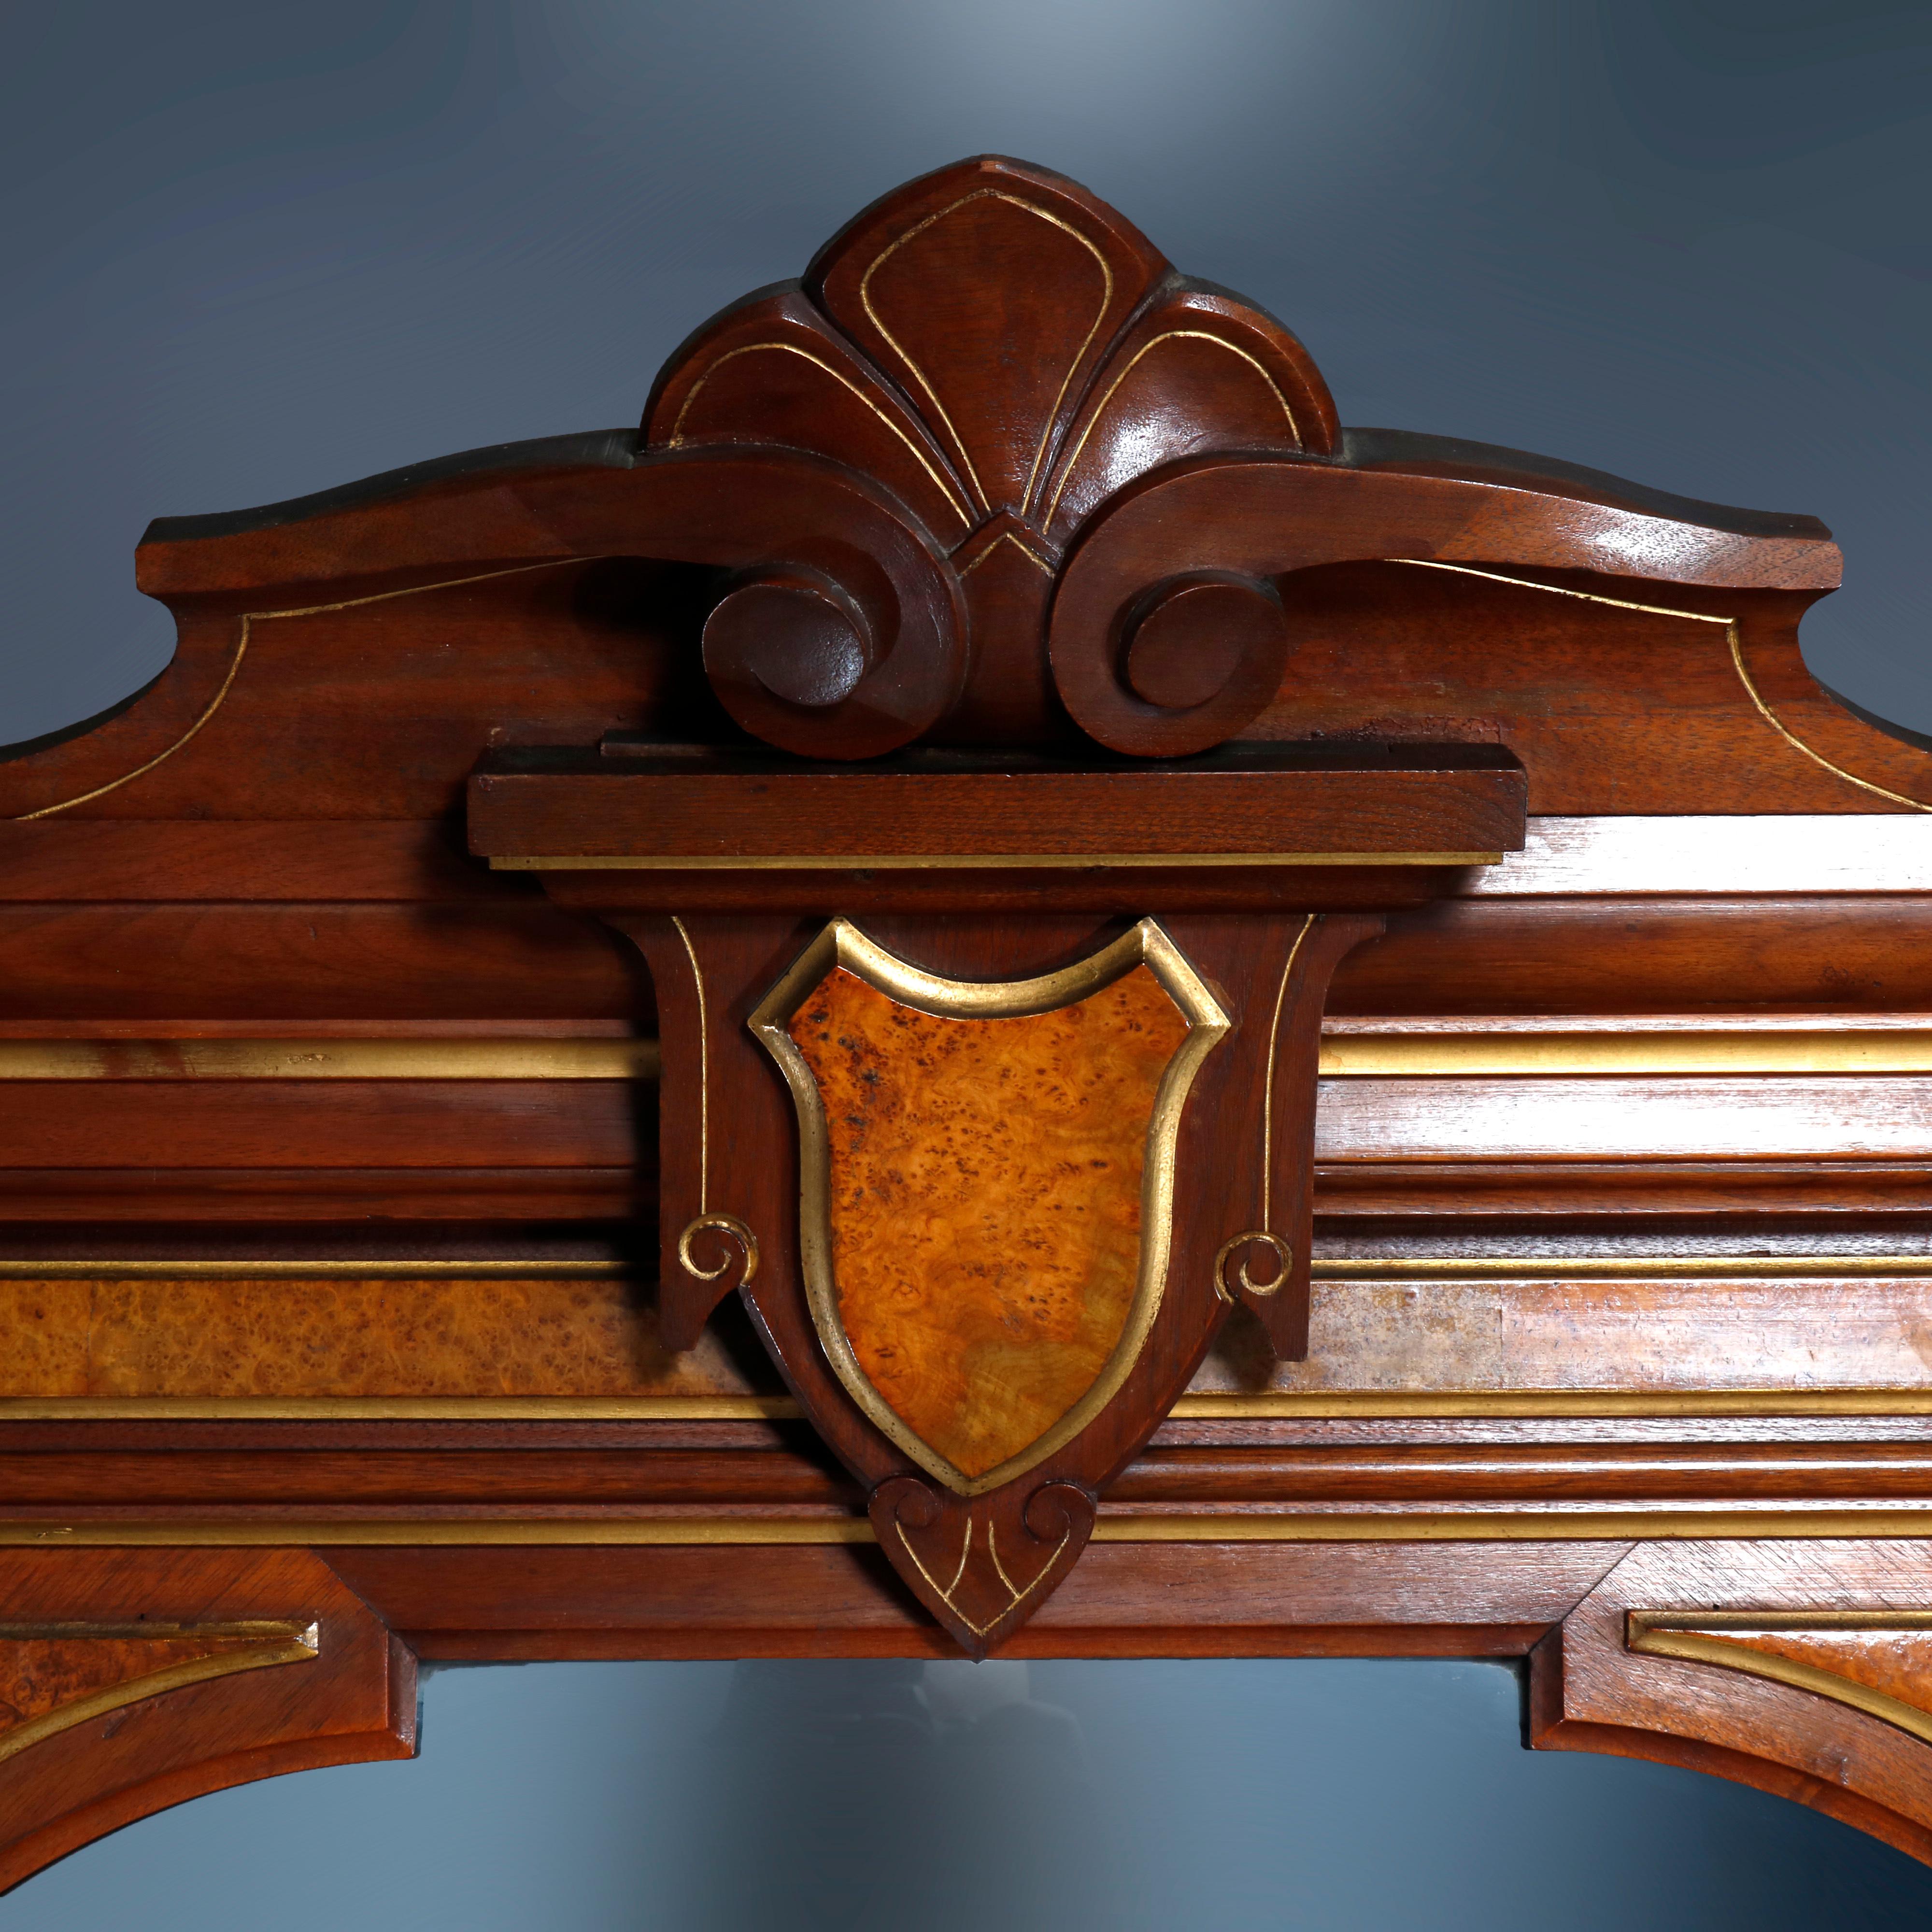 An antique Renaissance Revival pier mirror offers carved walnut frame having stylized shell crest surmounting shield reserve and having burl insets and gilt trimming throughout over shaped marble top base, circa 1880

Measures: 116.5